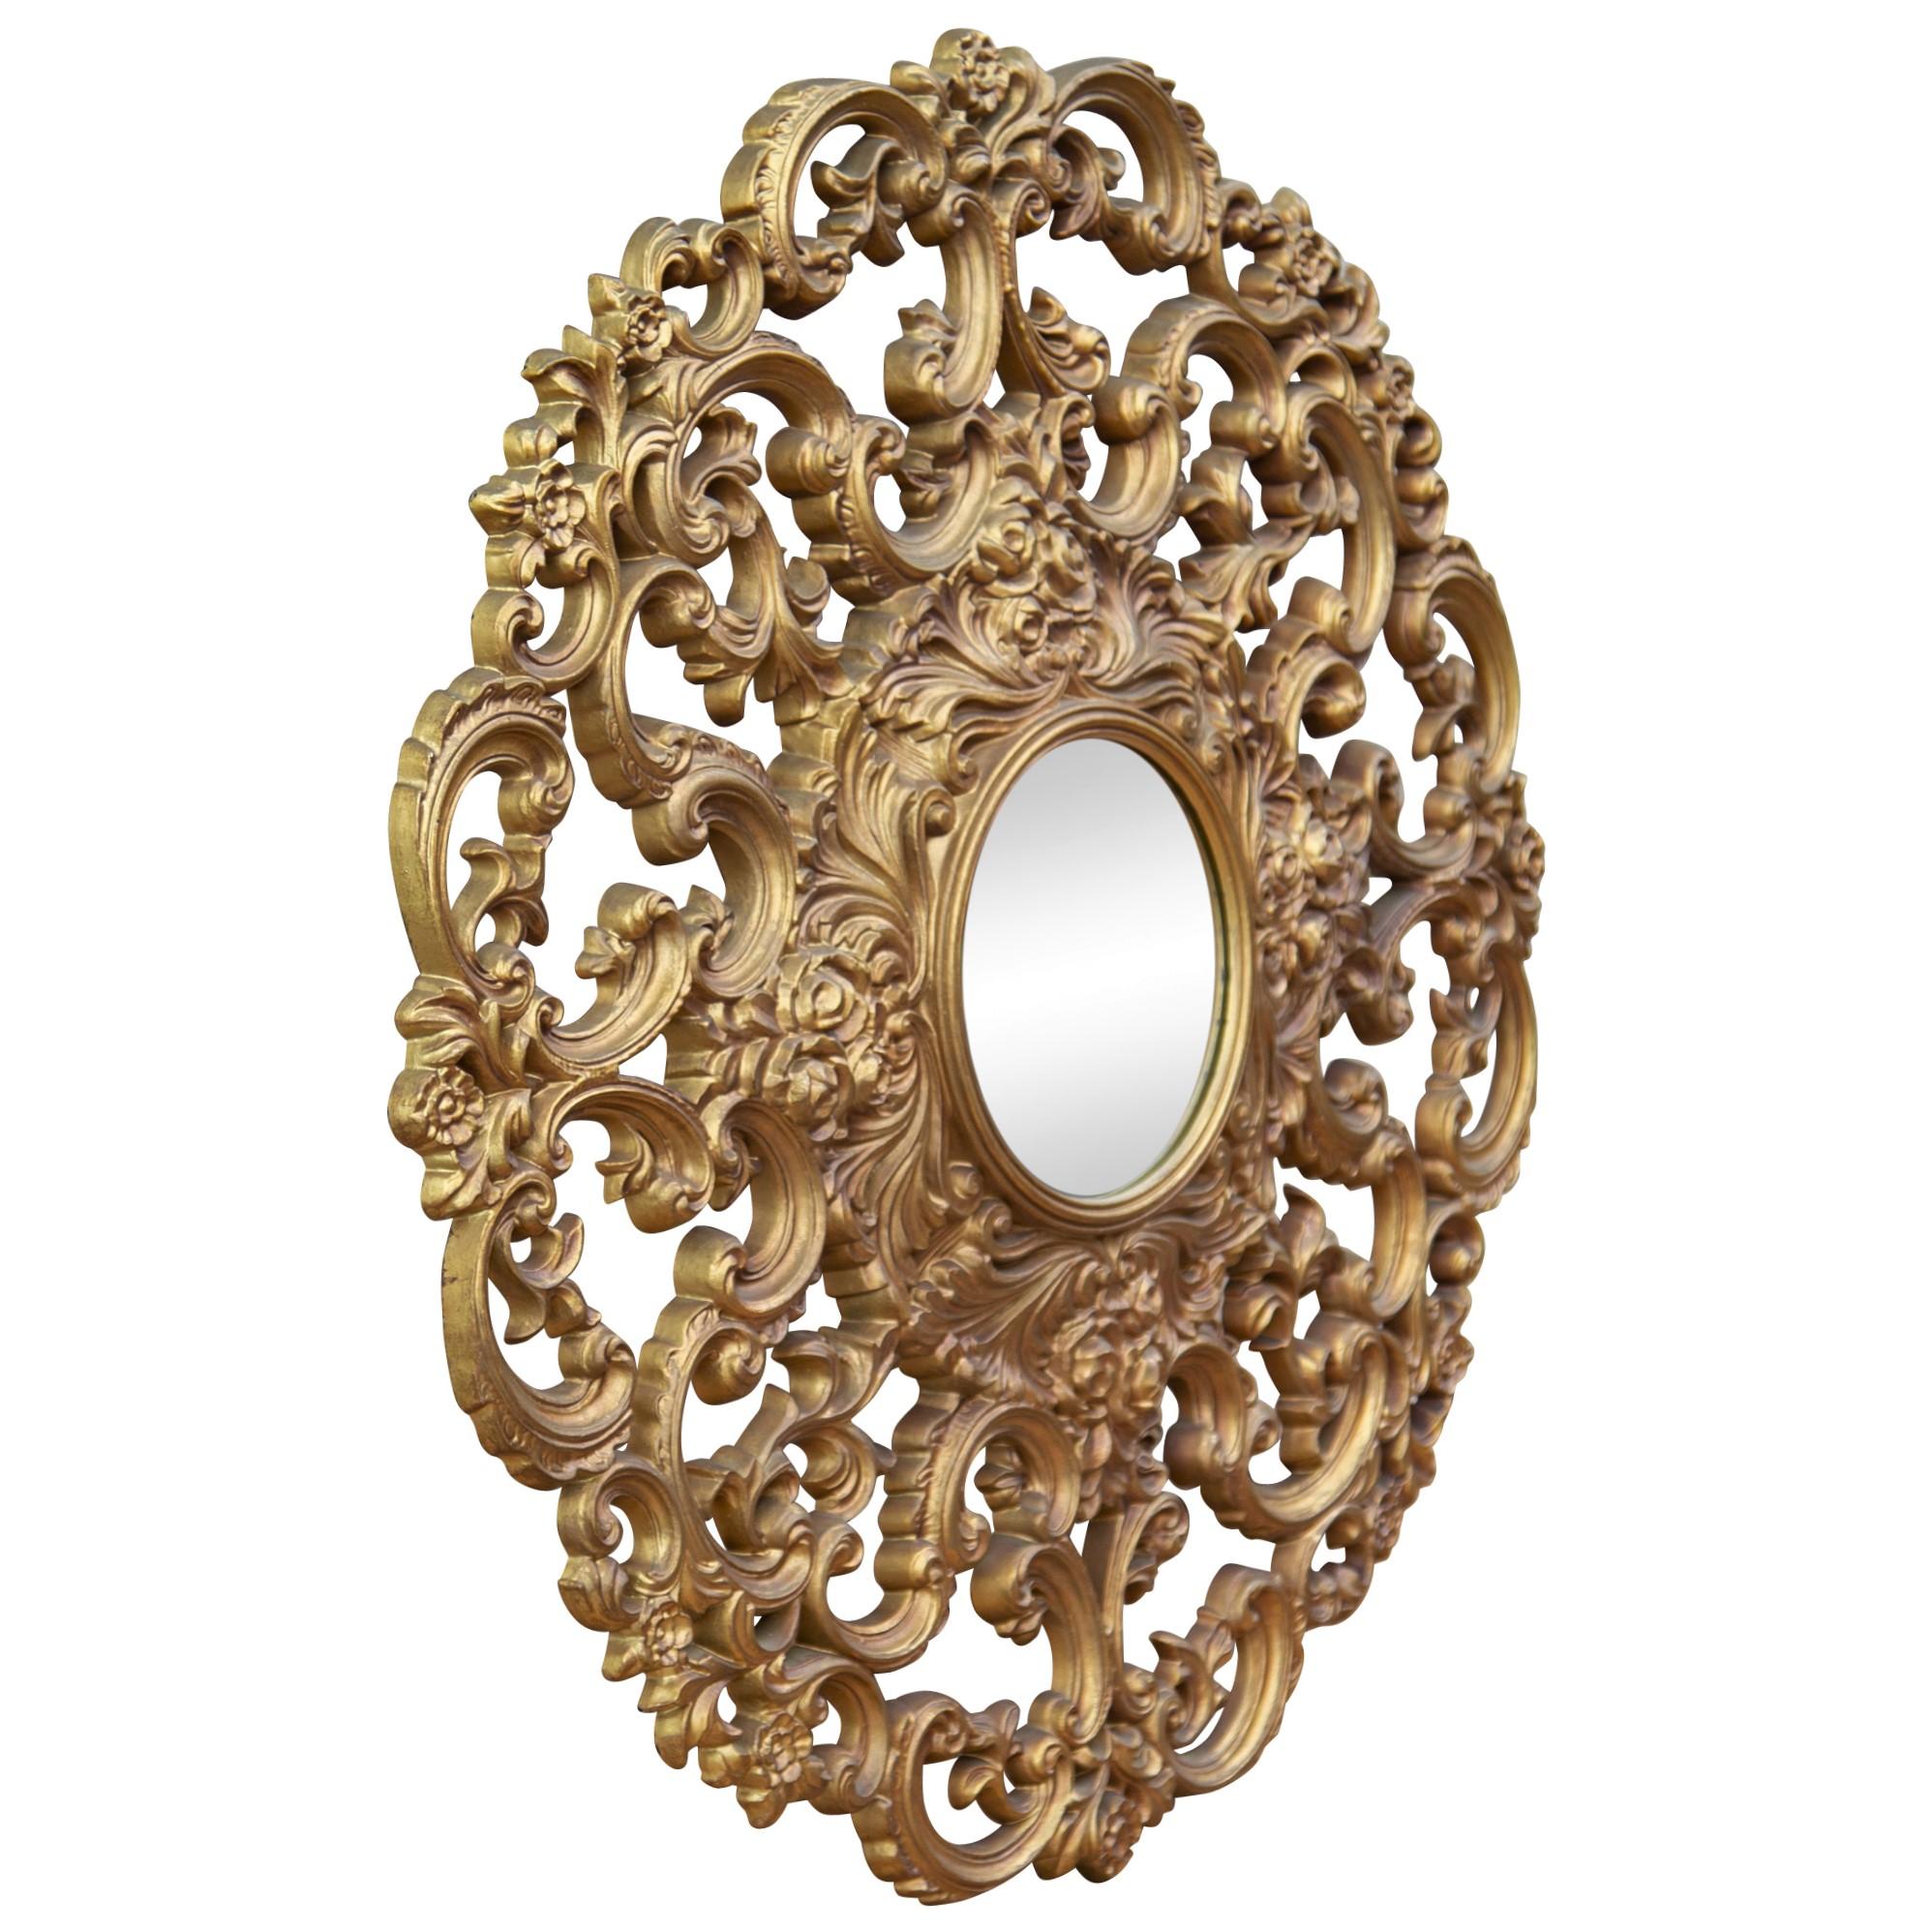 Midcentury Baroque or Rococo style gold cast resin mirror, circa 1960s. This 31